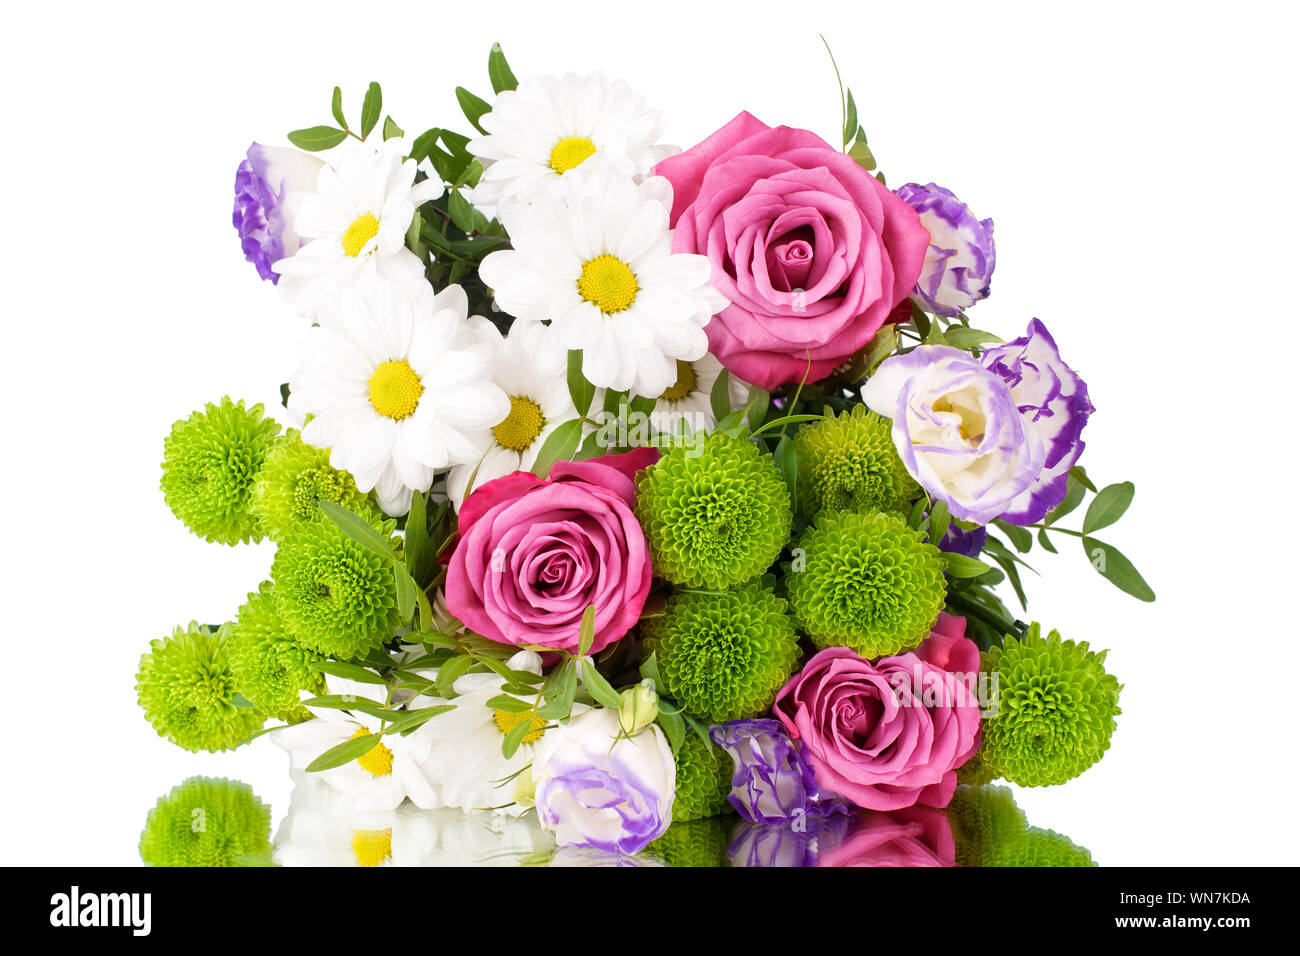 Bouquet of pink roses flowers, white daisies, chrysanthemums, green leaves, white background isolated close up, greeting card, banner, copy space Stock Photo